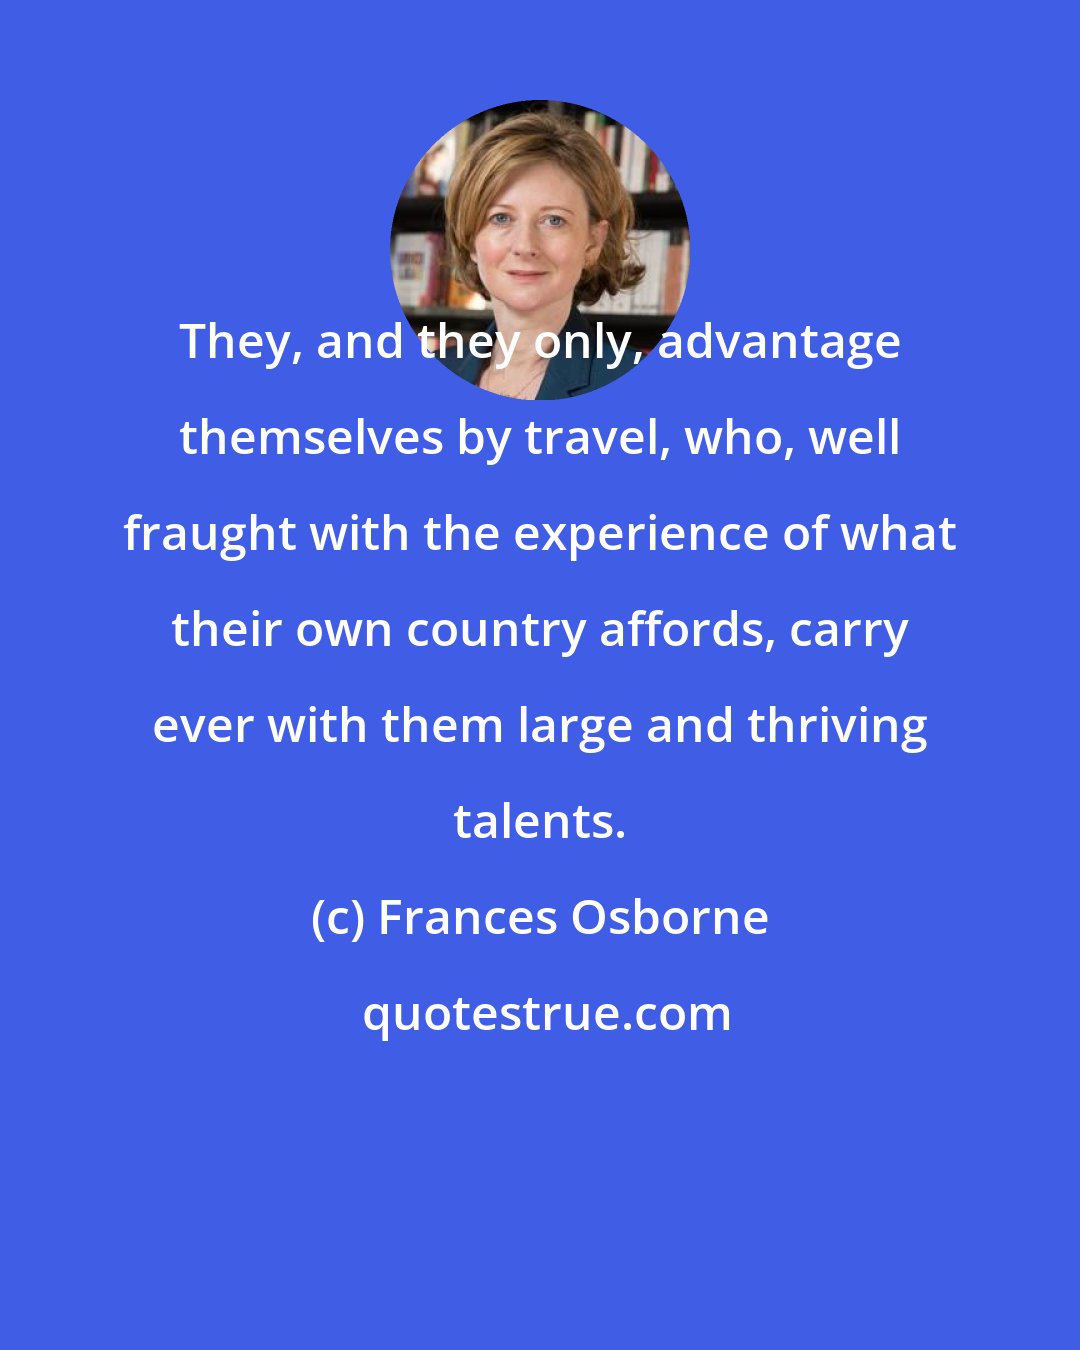 Frances Osborne: They, and they only, advantage themselves by travel, who, well fraught with the experience of what their own country affords, carry ever with them large and thriving talents.